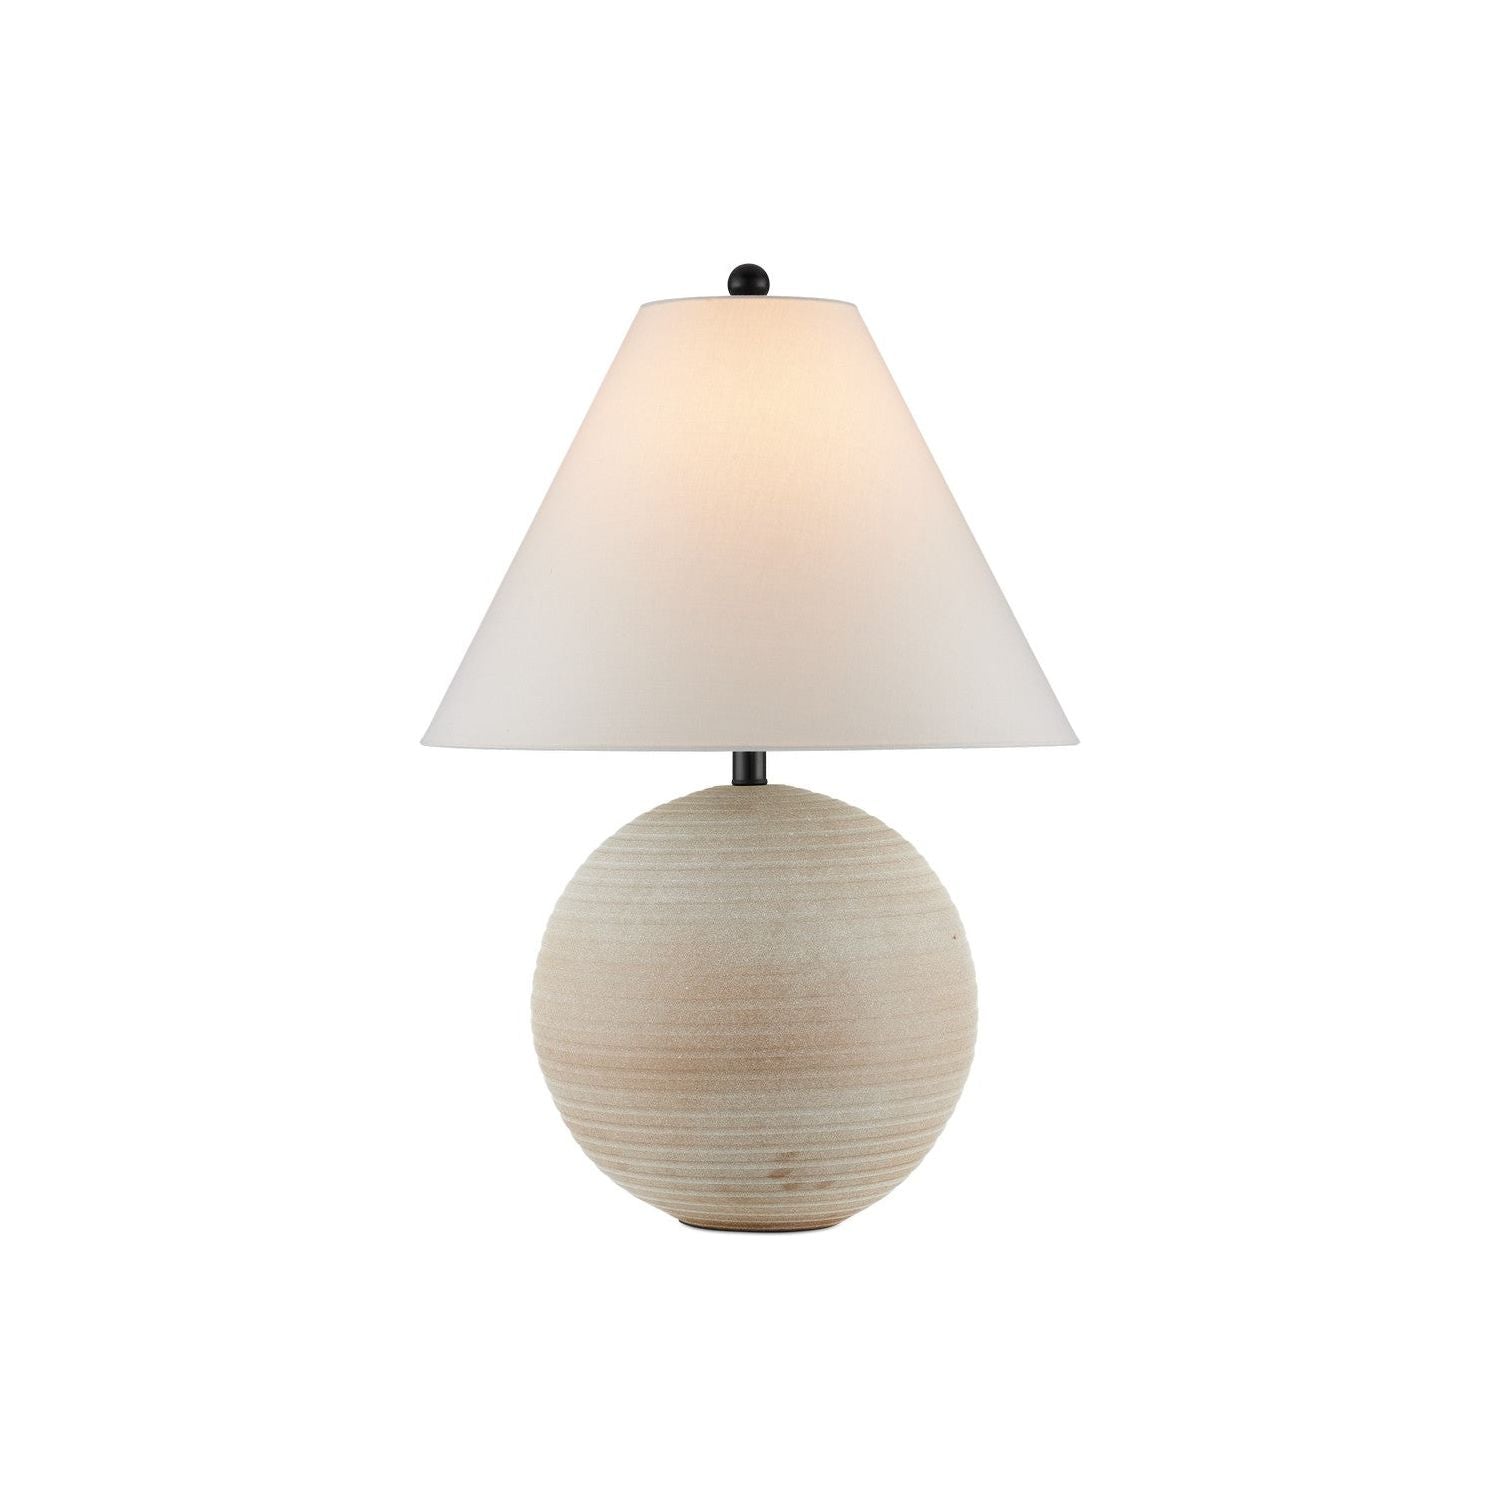 Currey and Company - 6000-0930 - One Light Table Lamp - Beige/Matte Black